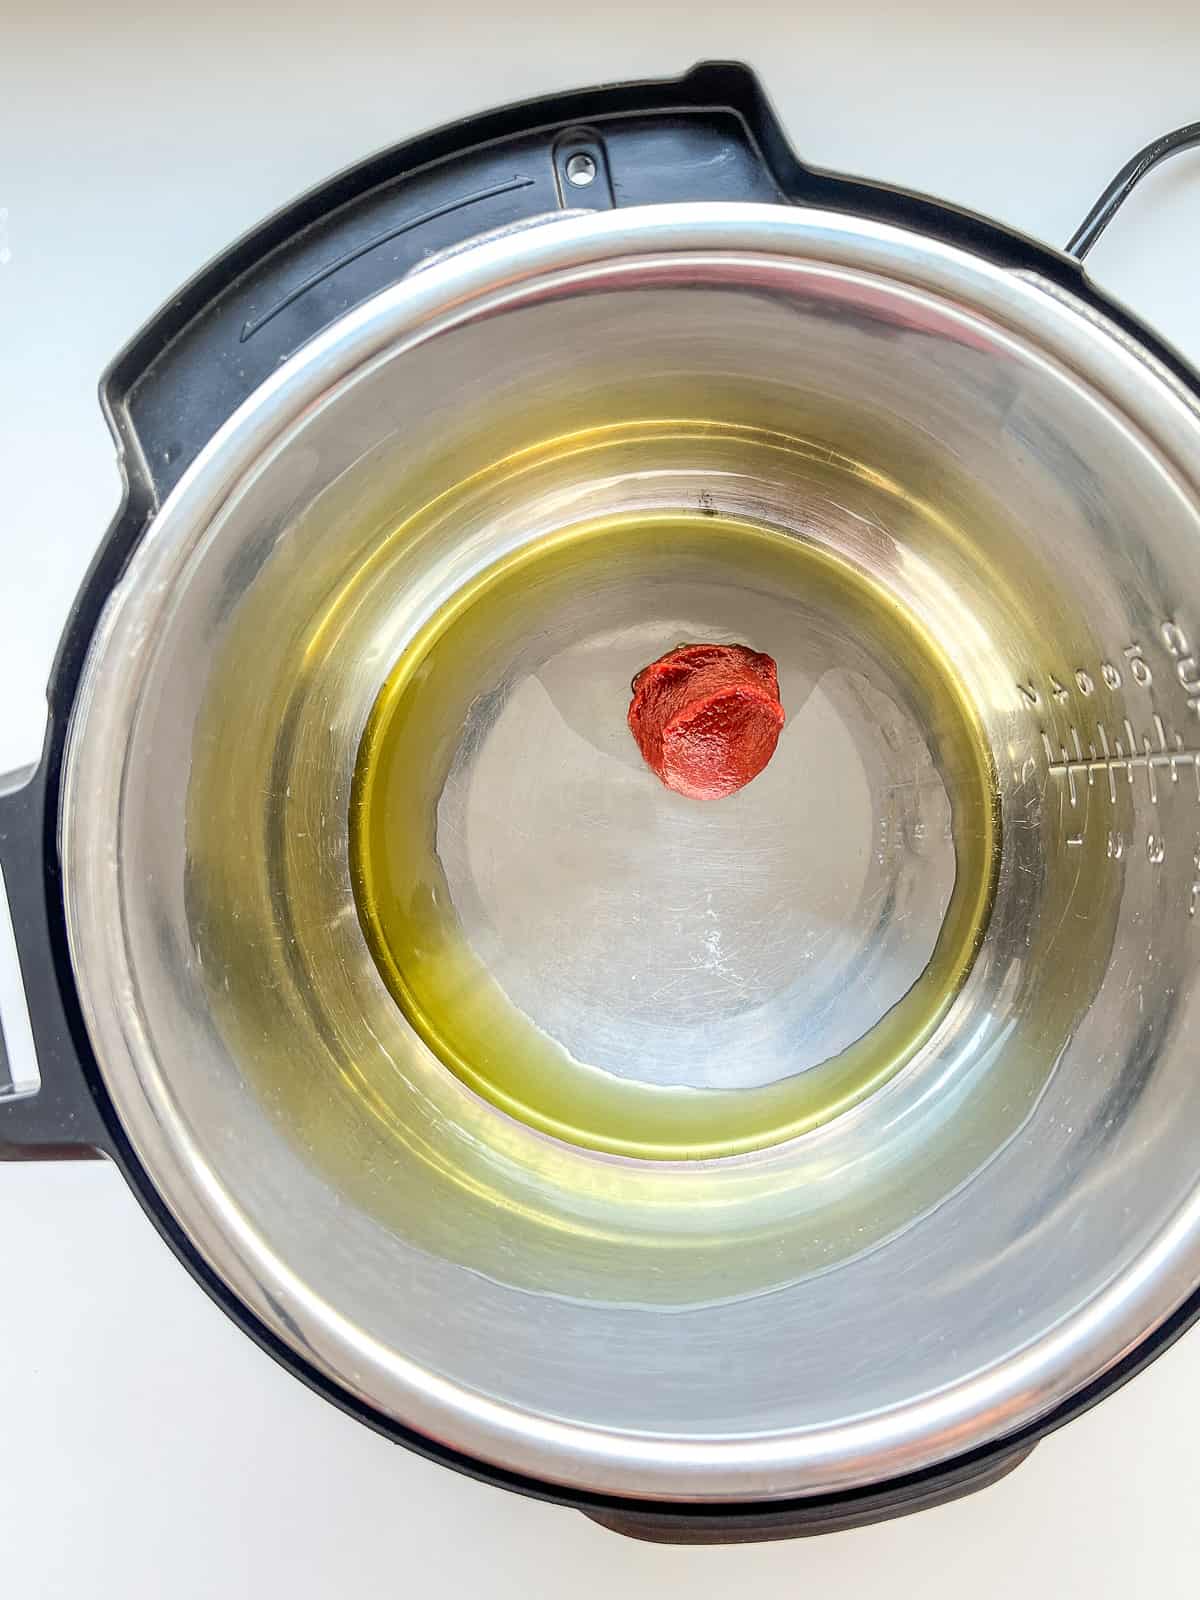 An image of oil and tomato paste in an instant pot.